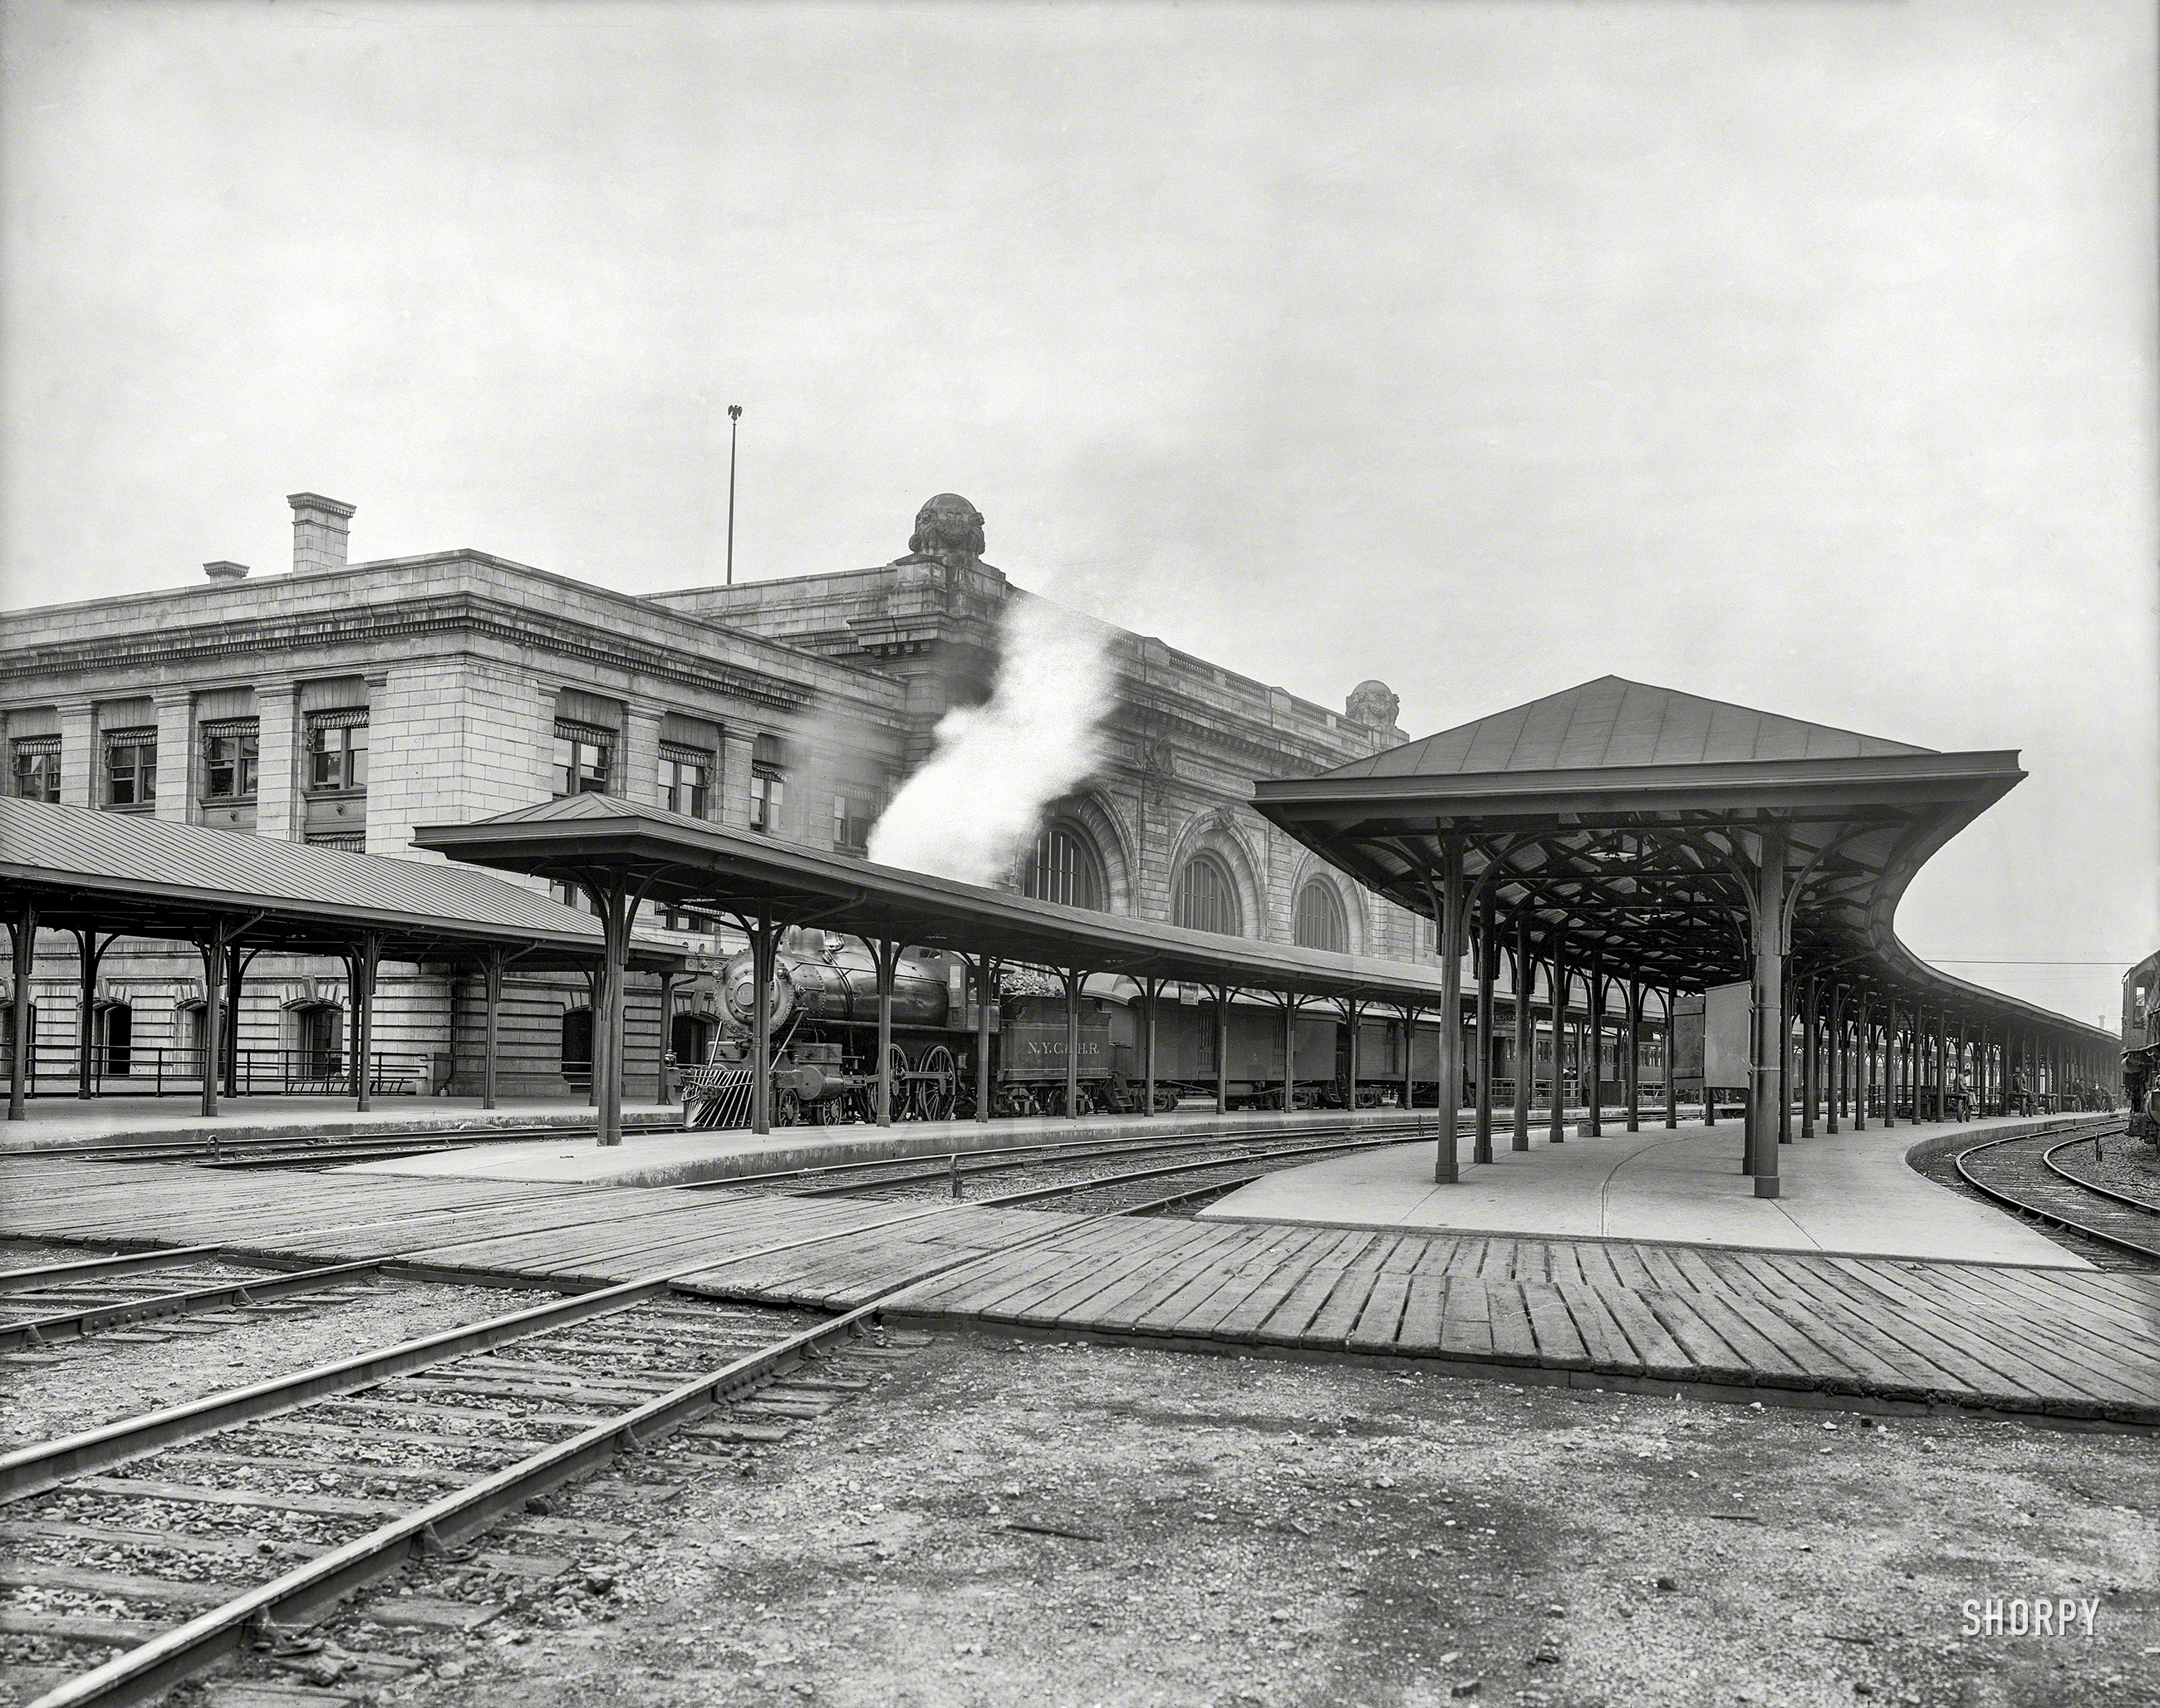 1904. "New York Central & Hudson River R.R. station, Albany, N.Y." 8x10 inch dry plate glass negative, Detroit Publishing Company. View full size.